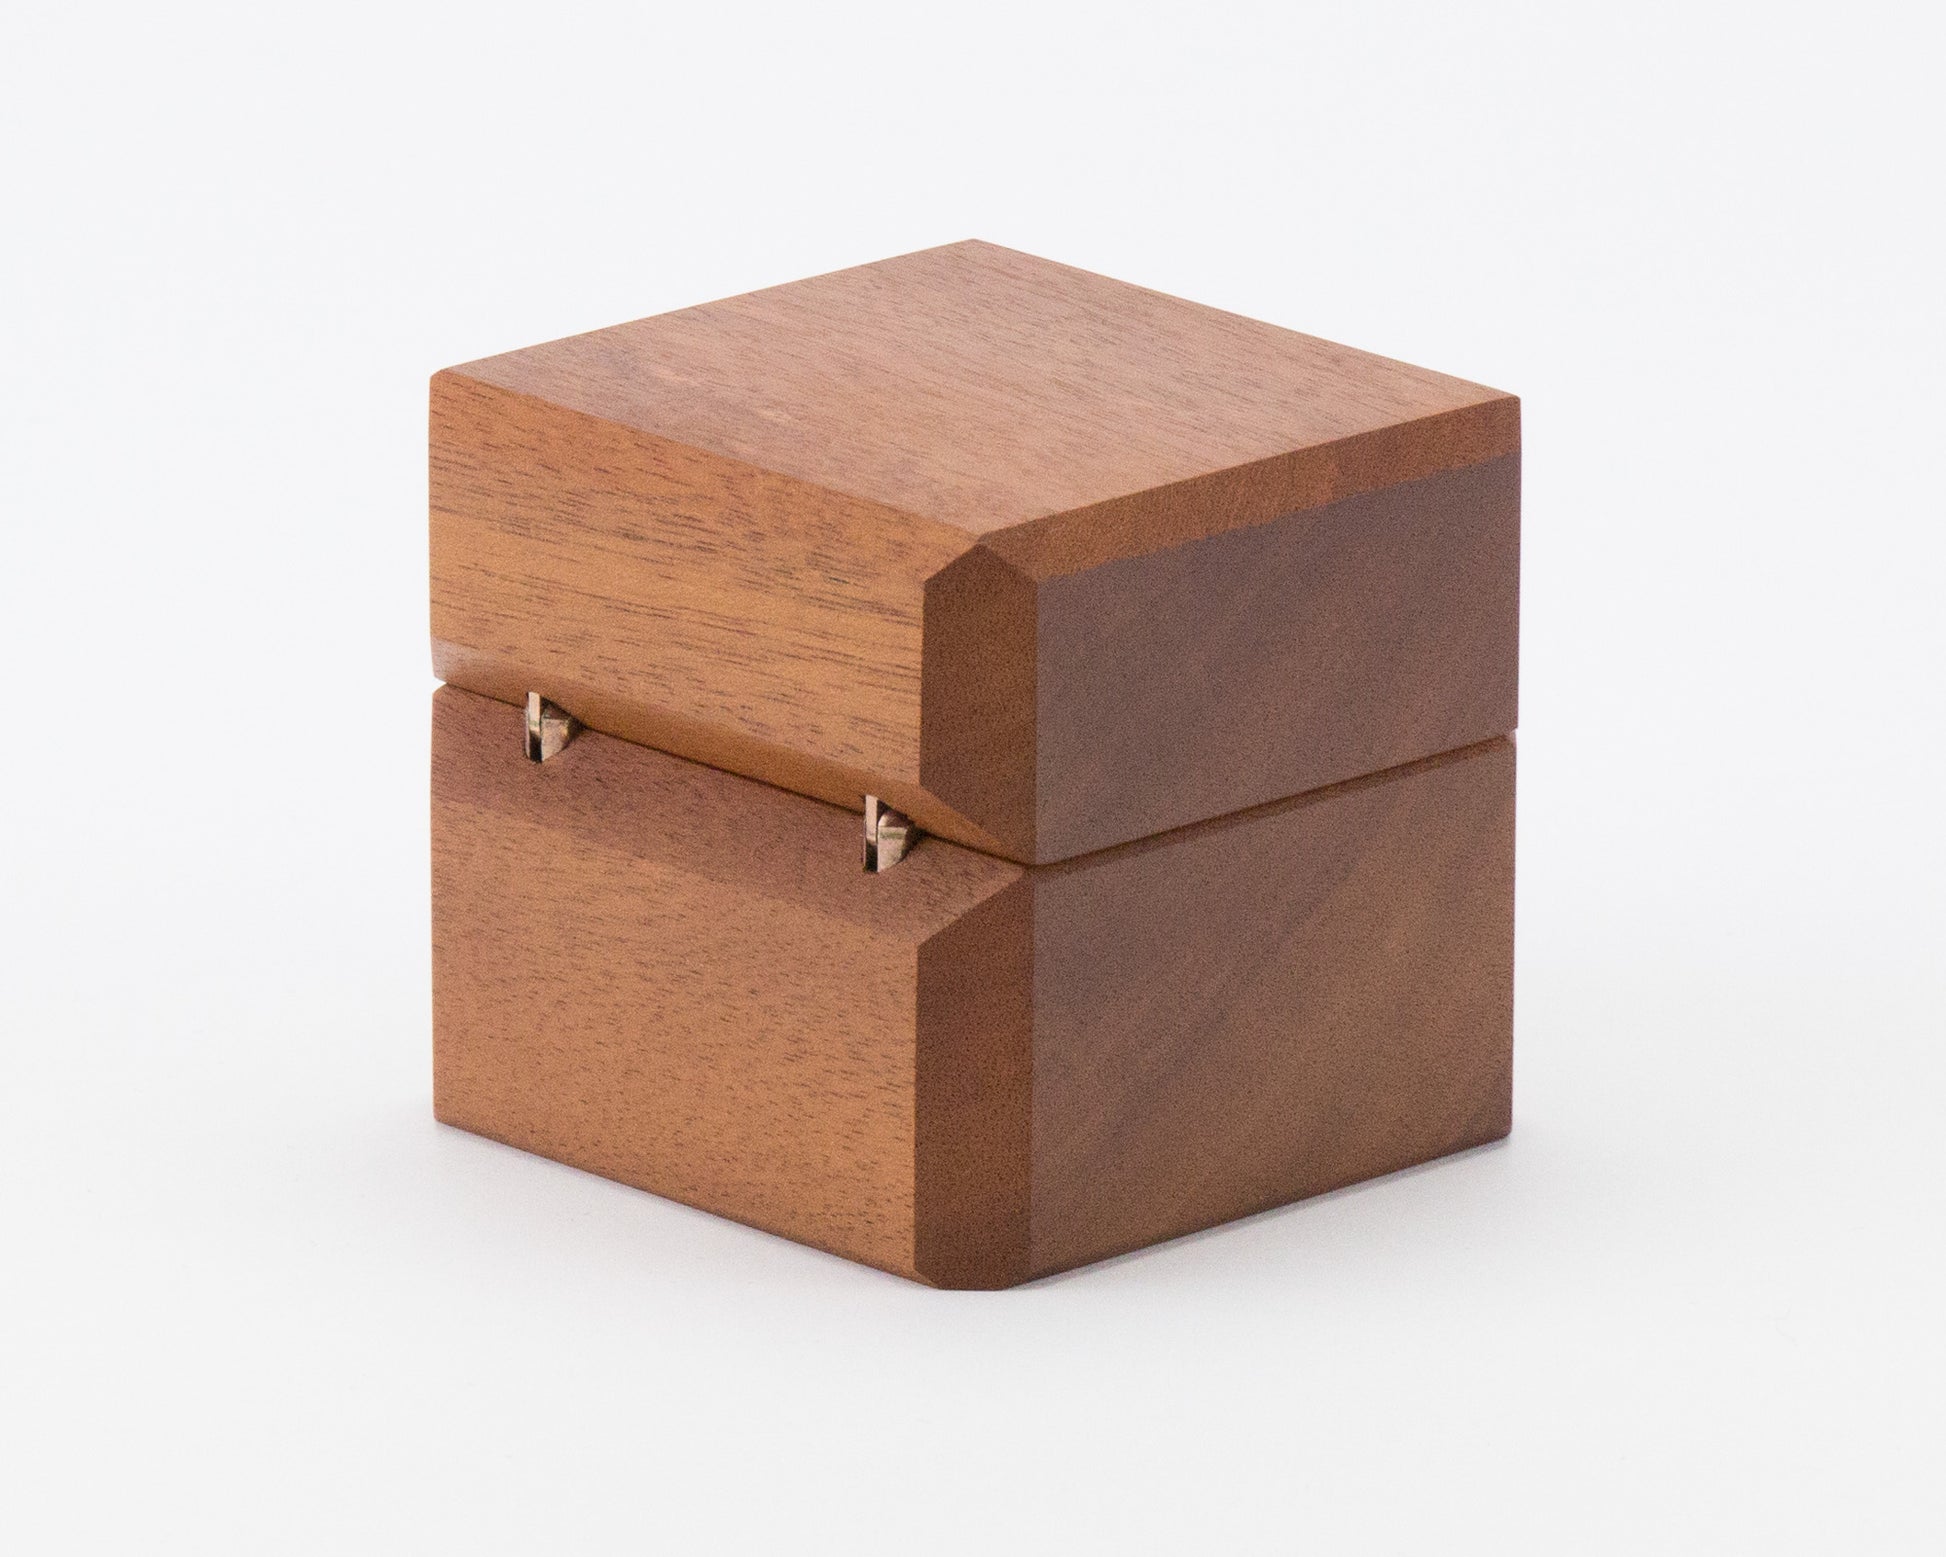 The Elegance wooden ring box handcrafted from NSW Rosewood